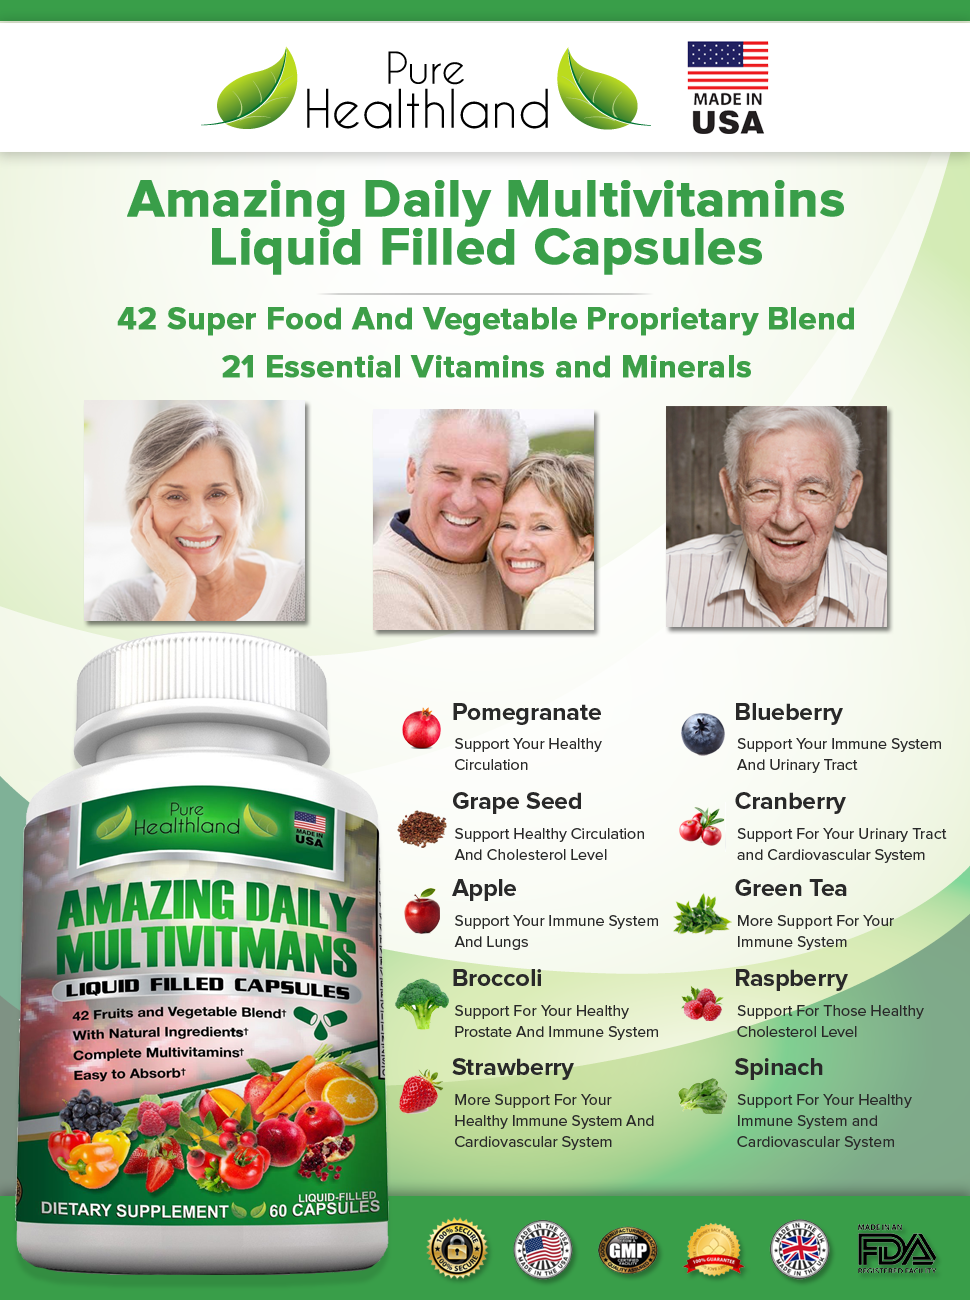 Daily Multivitamin Liquid Filled Capsules For Men and Women Over 40, 5 – Pure Healthland